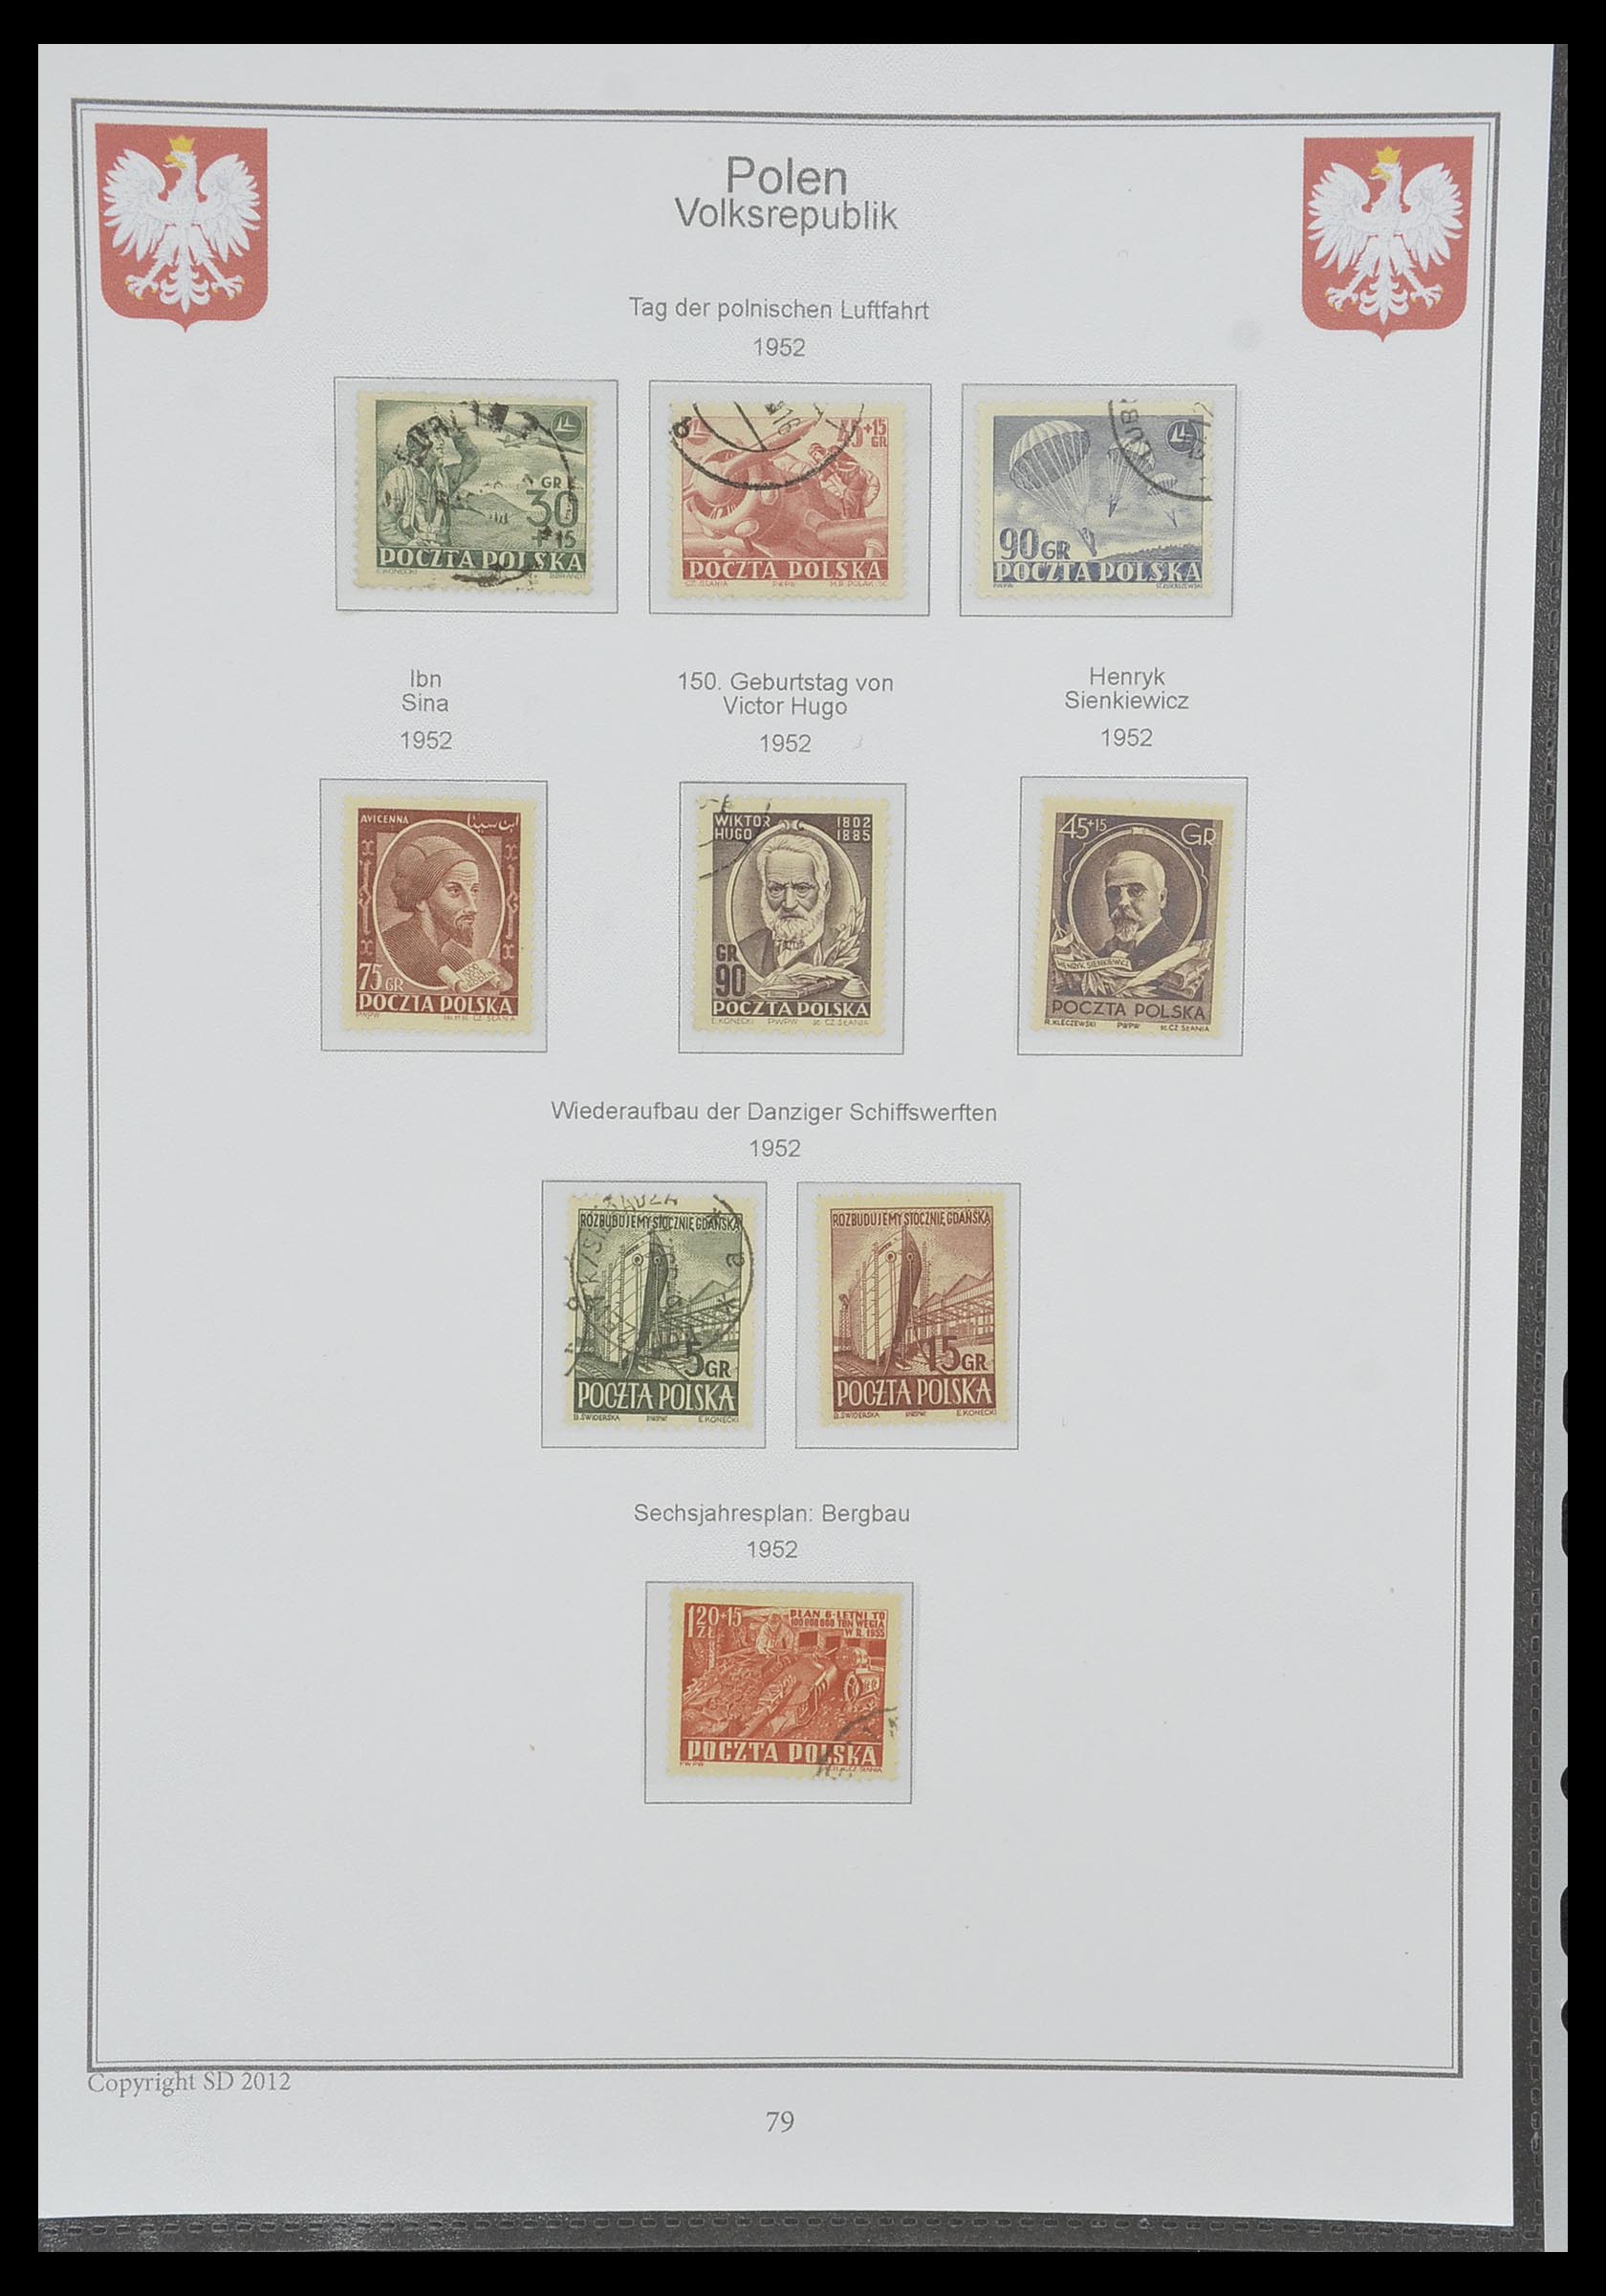 33977 072 - Stamp collection 33977 Poland 1860-2014.